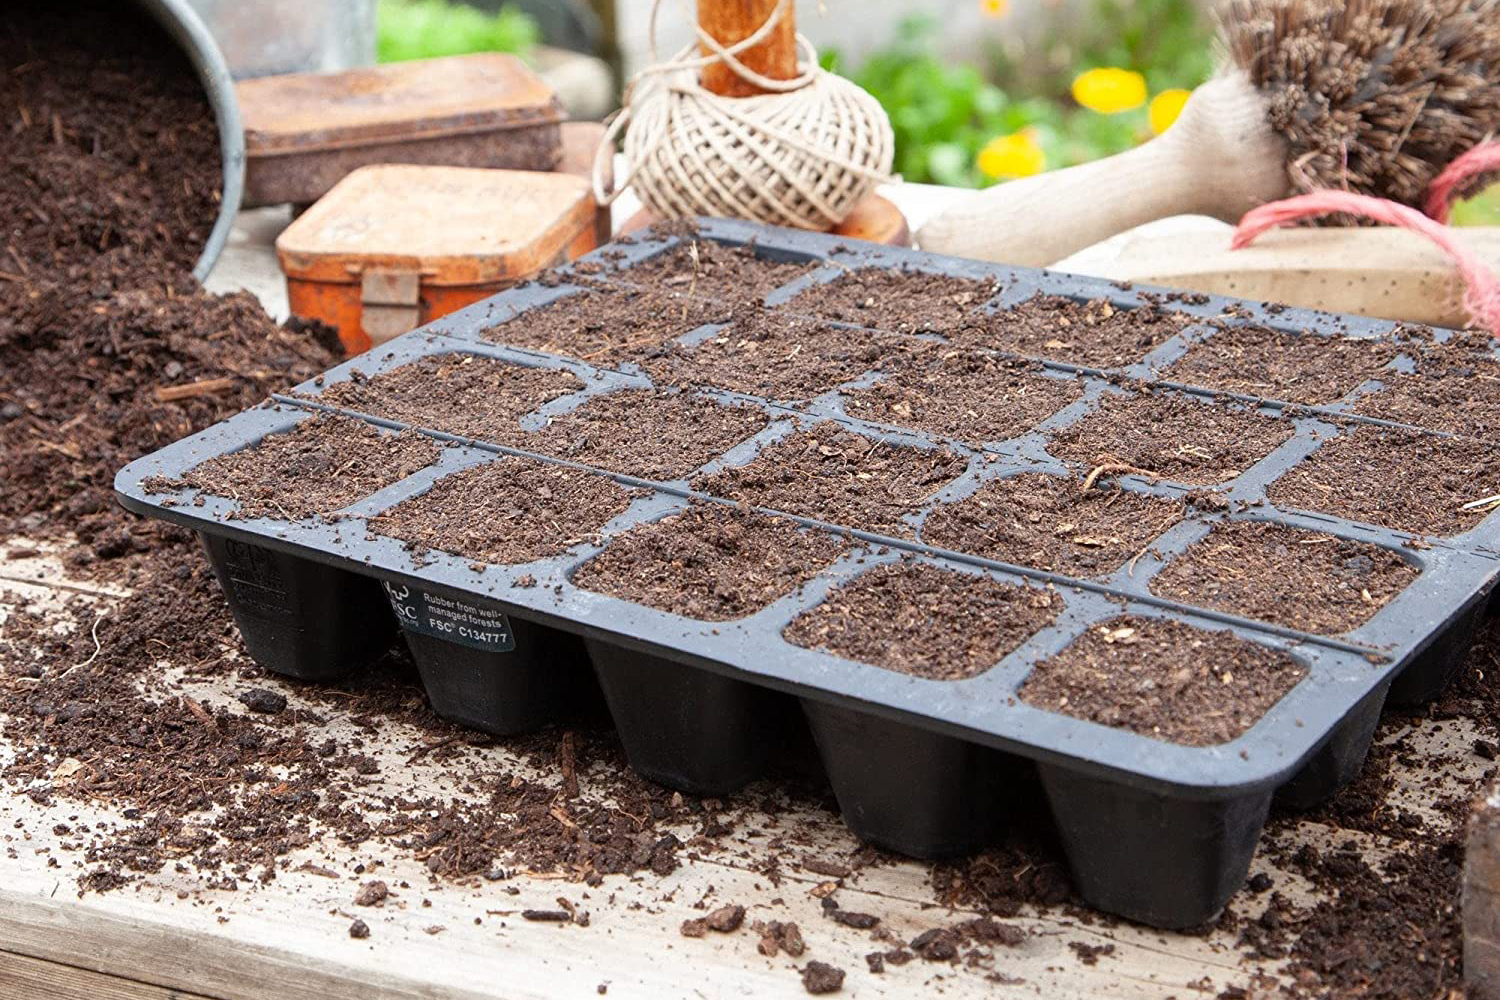 Never Miss a Planting Date - Seed Storage Box Organization!